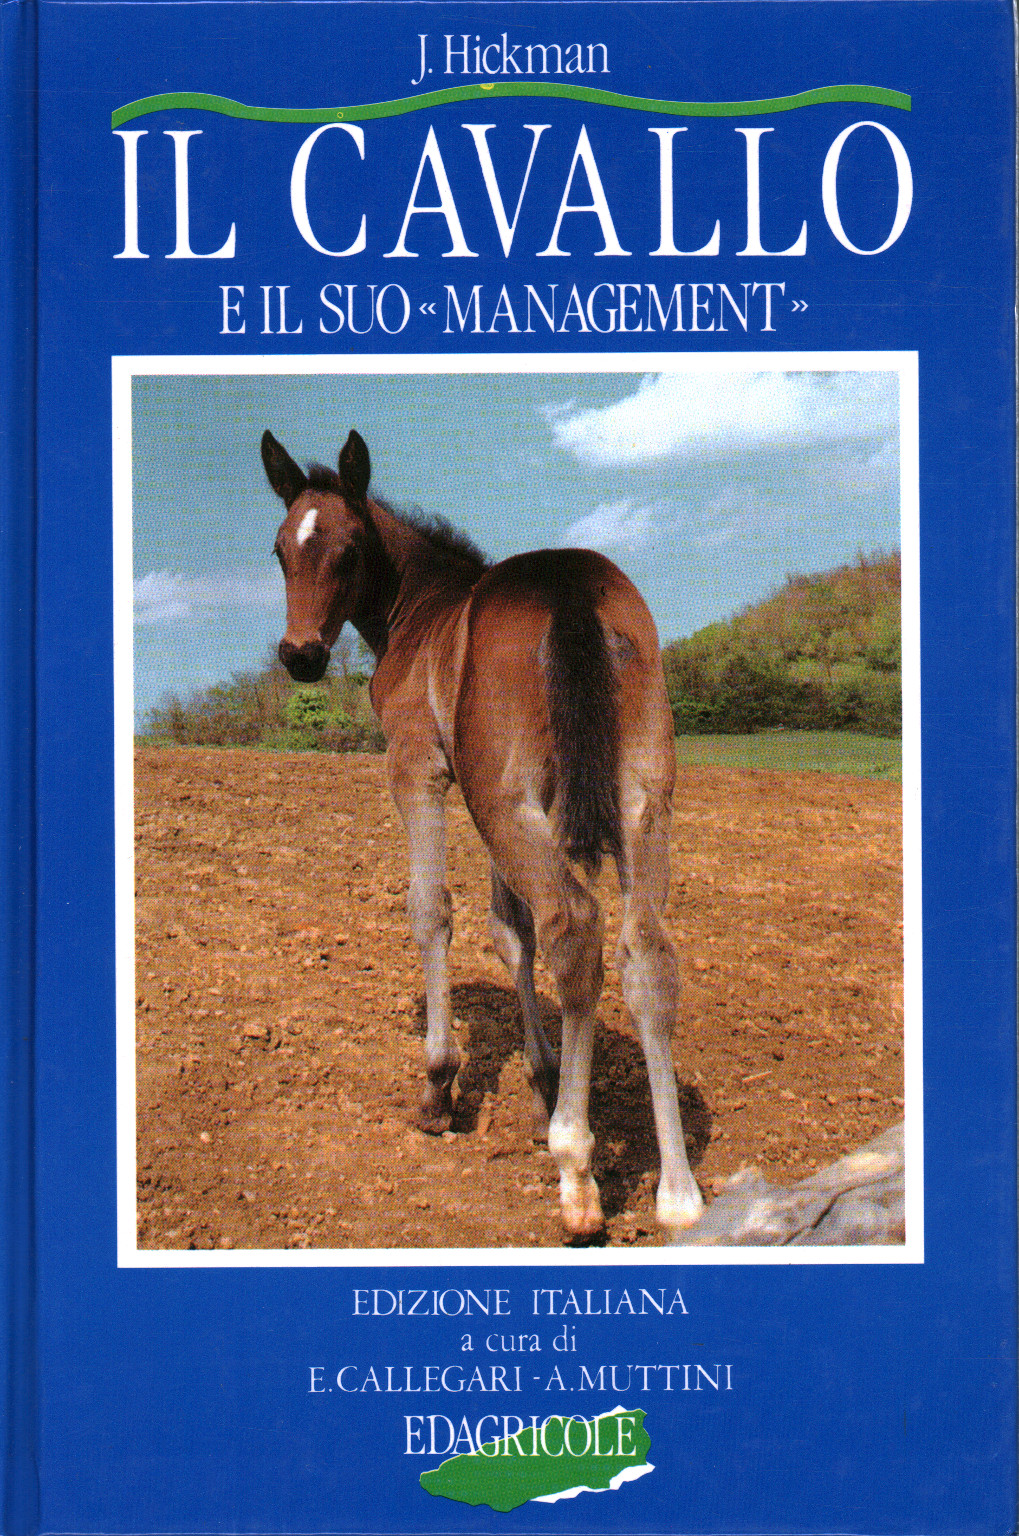 The horse and its "management", s.a.